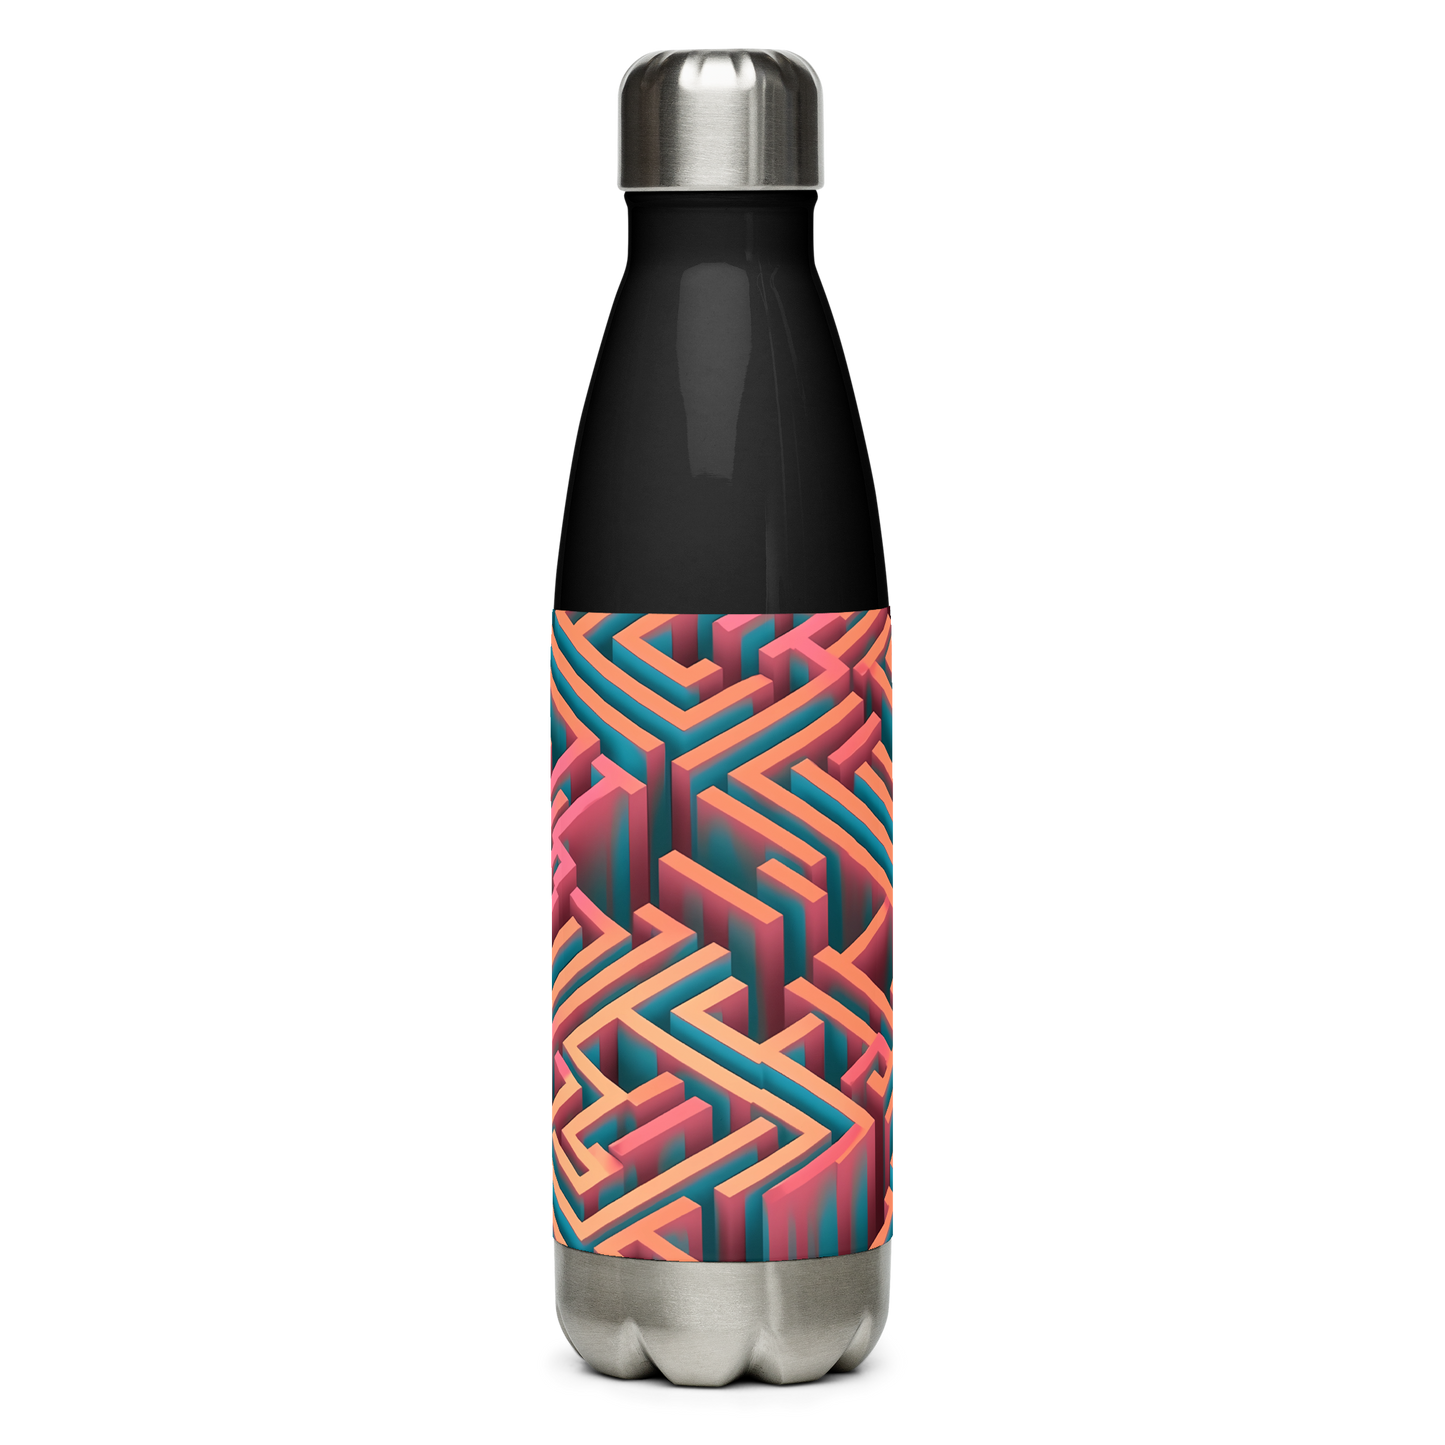 3D Maze Illusion | 3D Patterns | Stainless Steel Water Bottle - #1